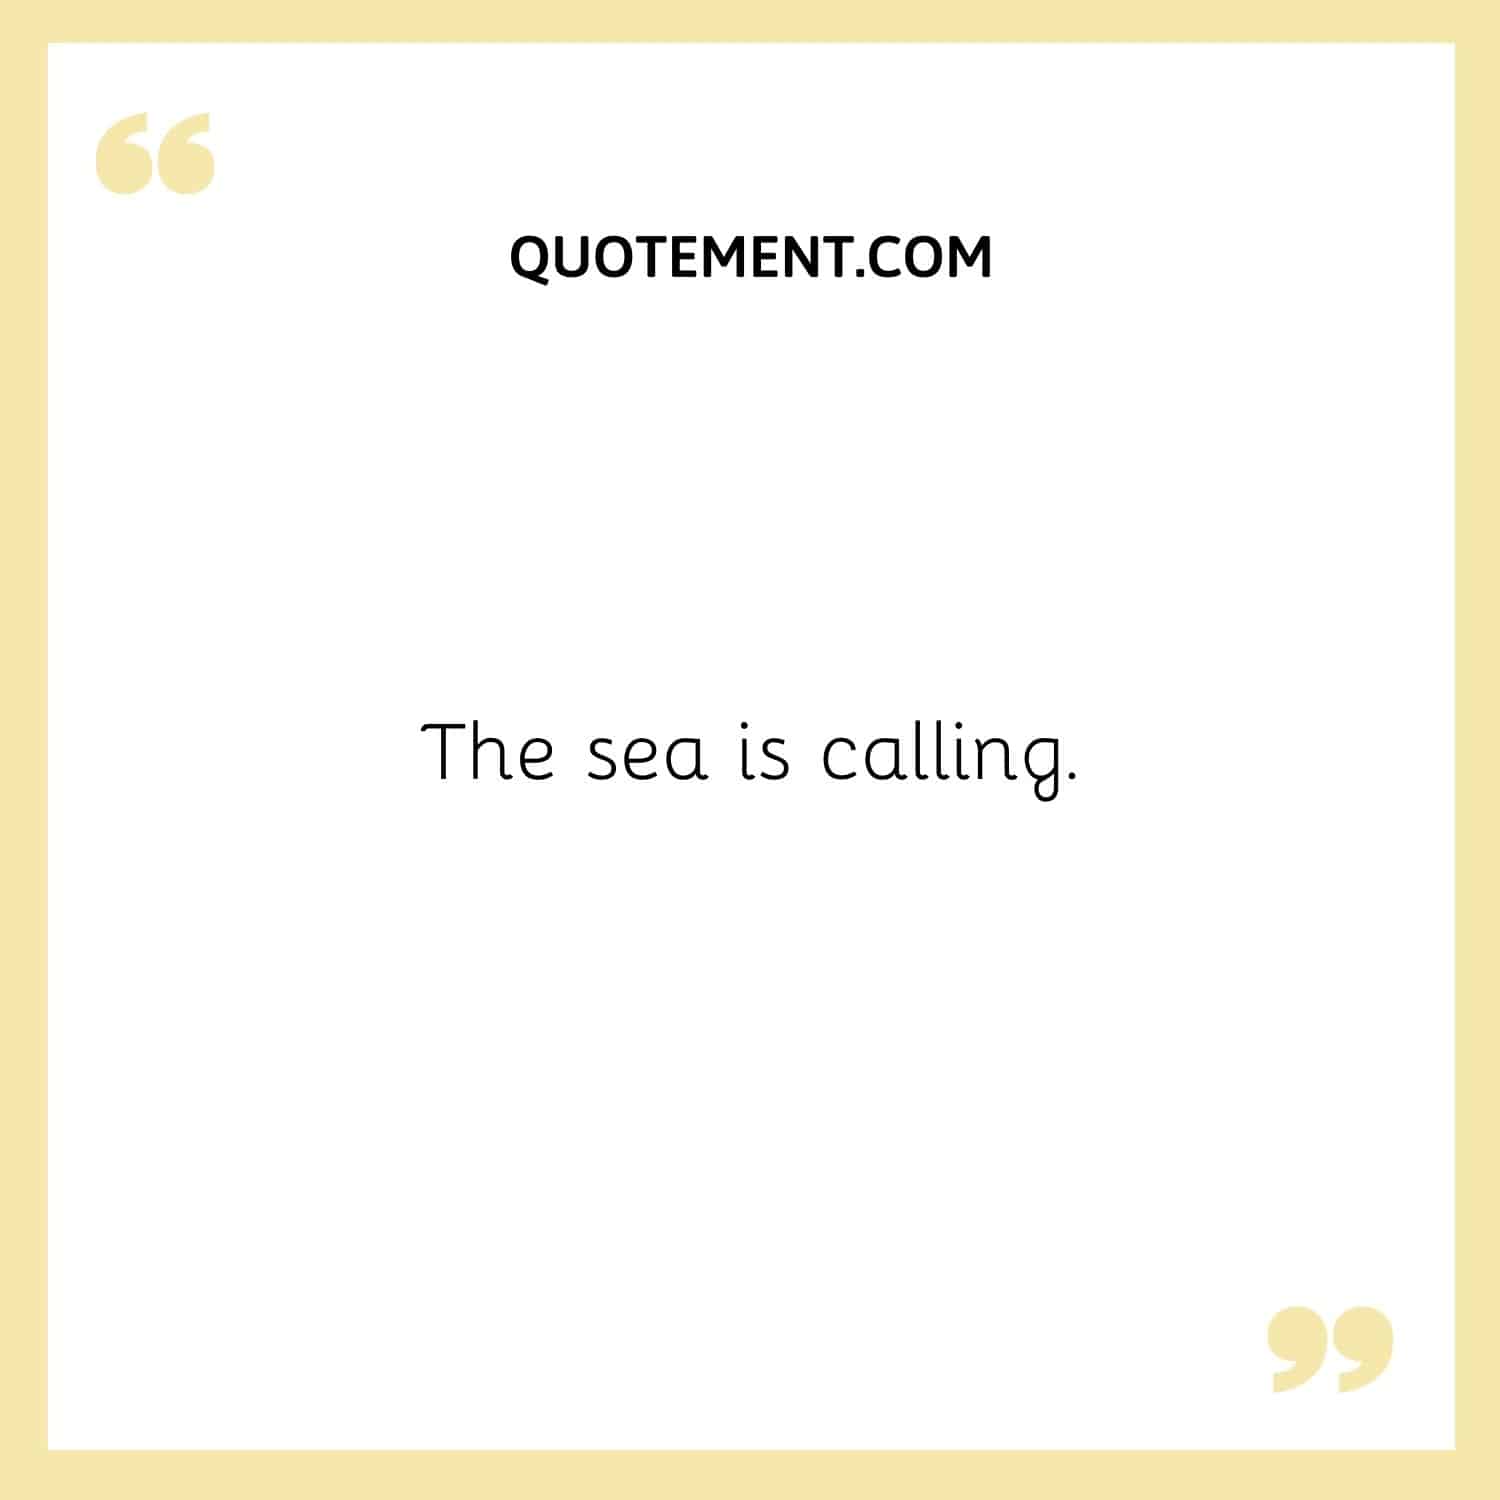 The sea is calling.